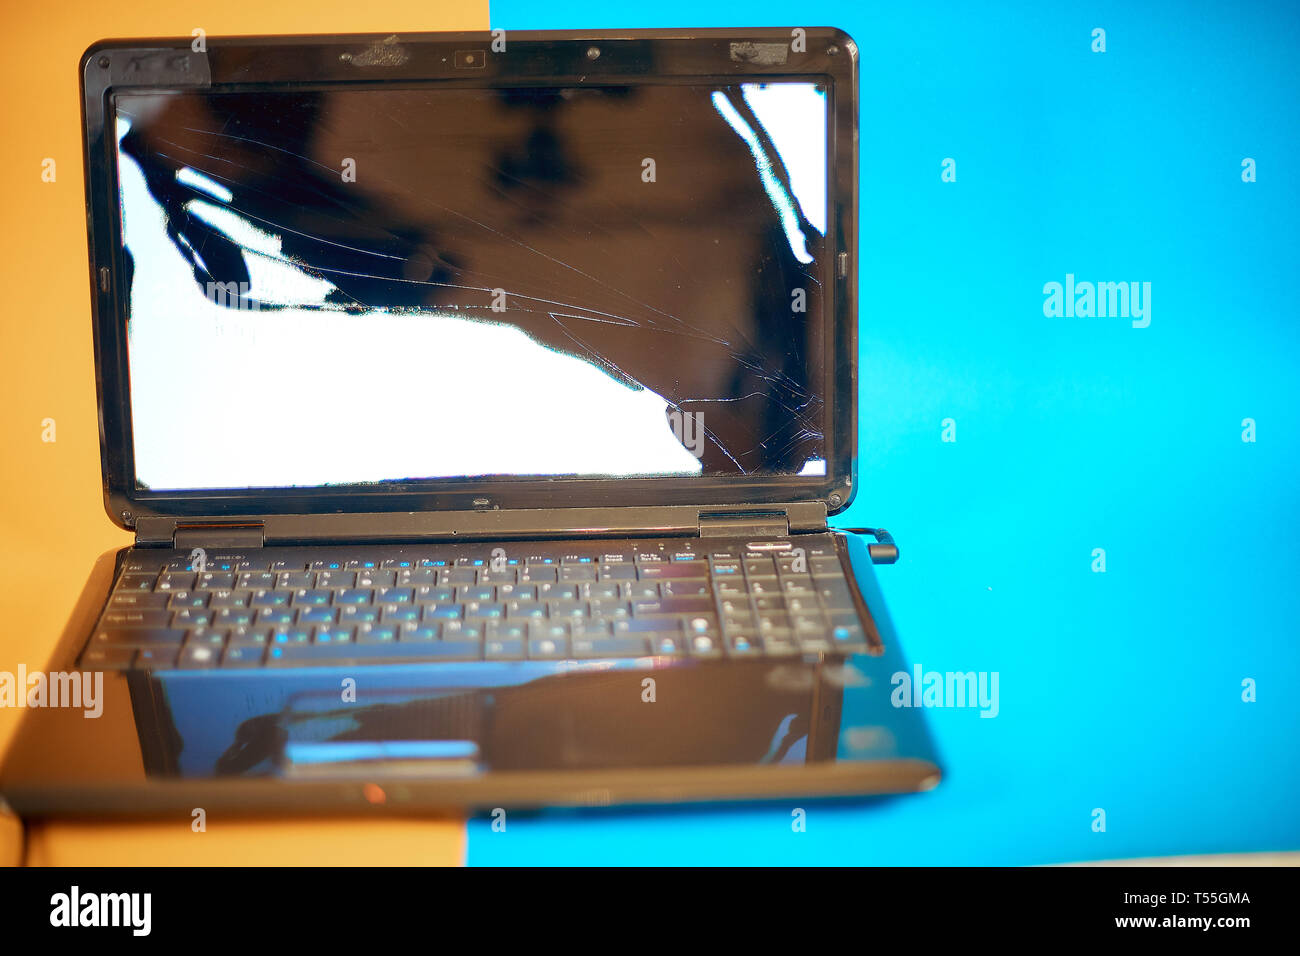 a broken laptop screen on a colorful background Stock Photo